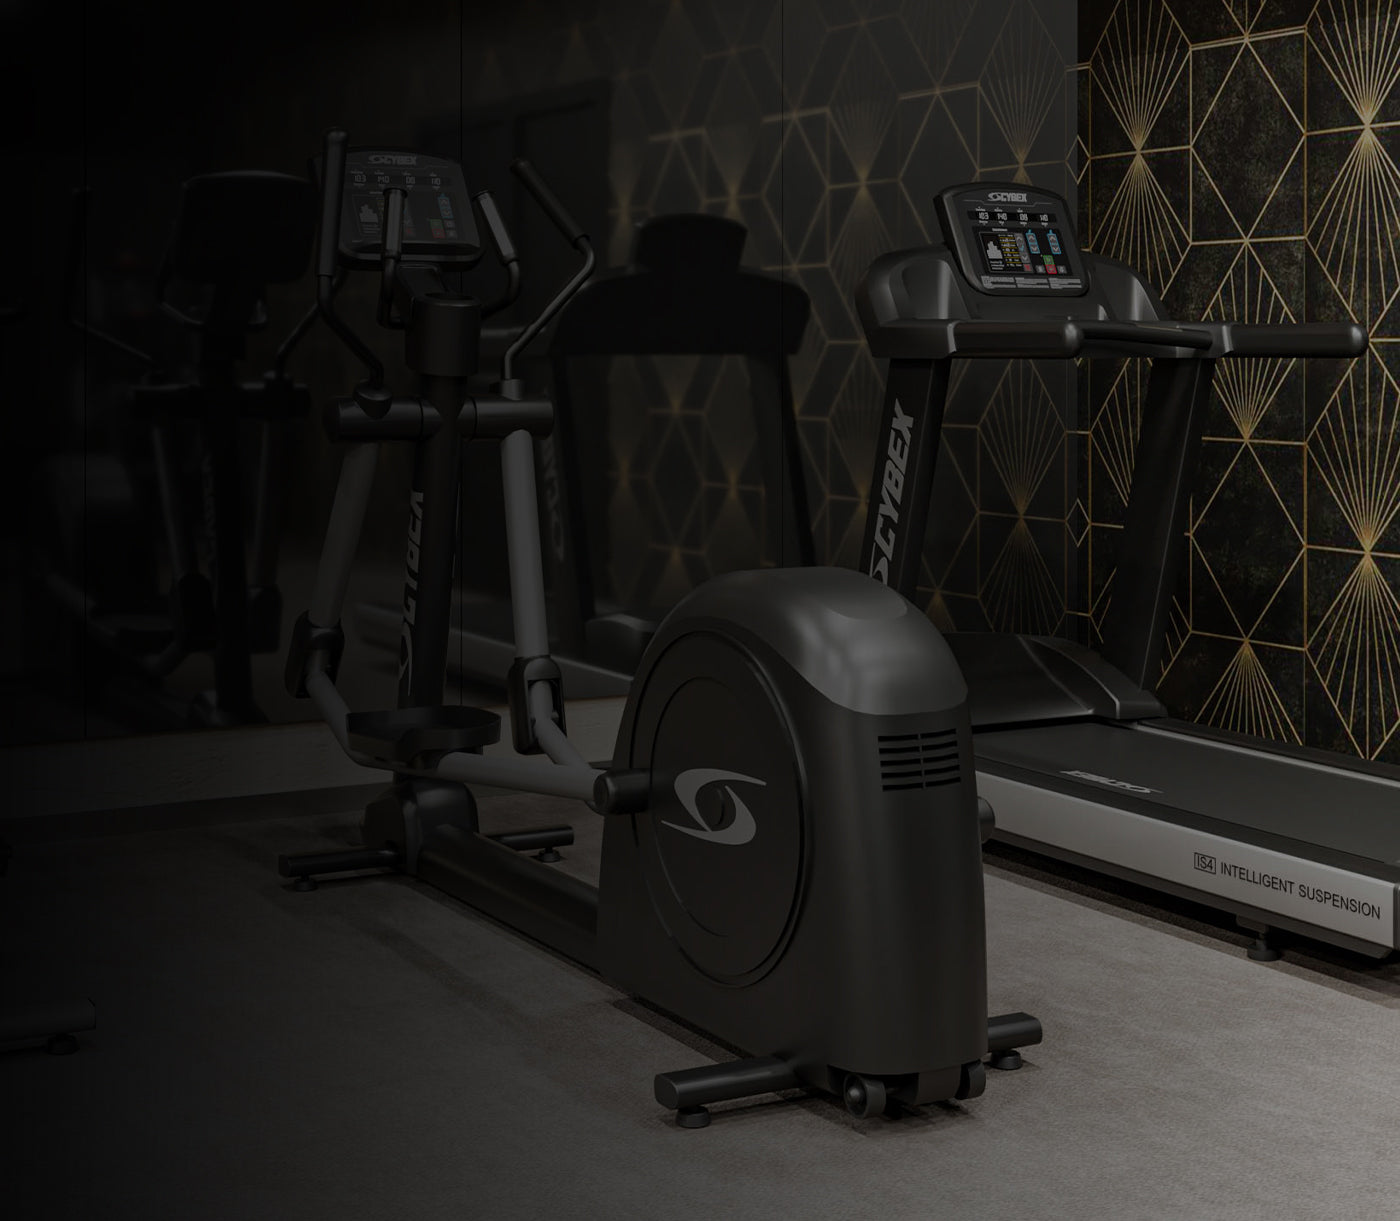 Life Fitness Brands - Club Quality Equipment for Home Use